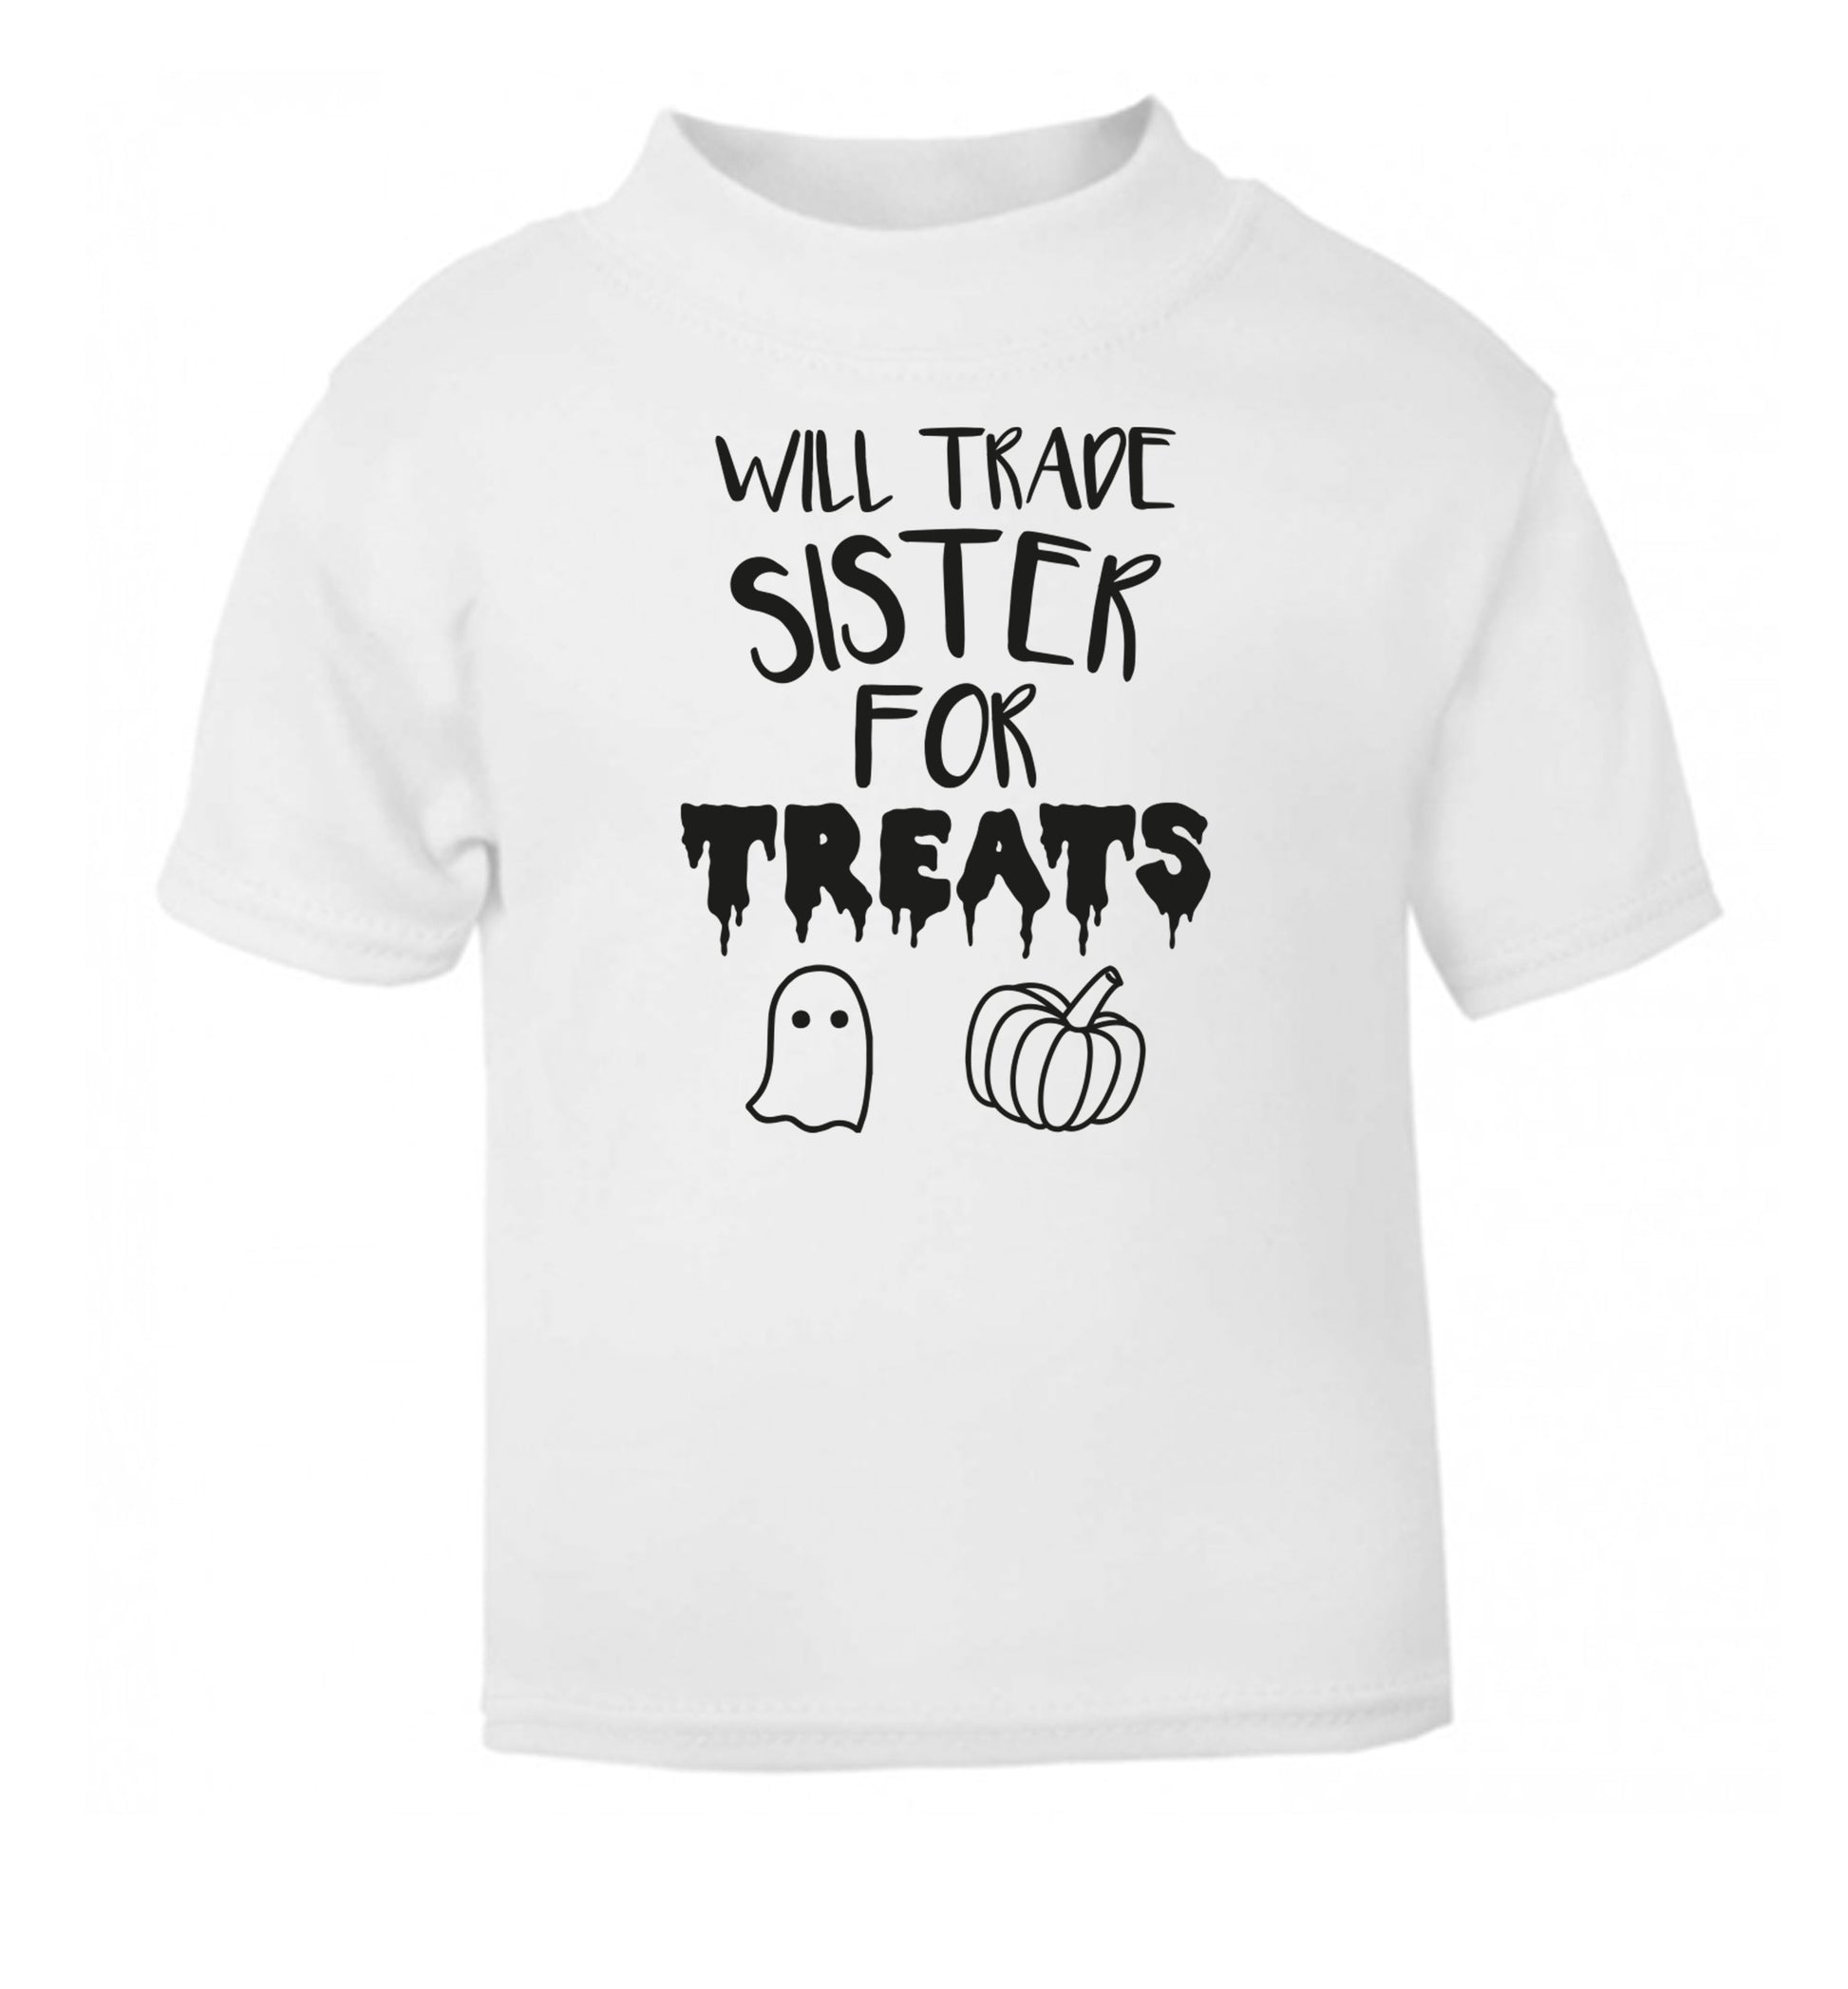 Will trade sister for treats white Baby Toddler Tshirt 2 Years